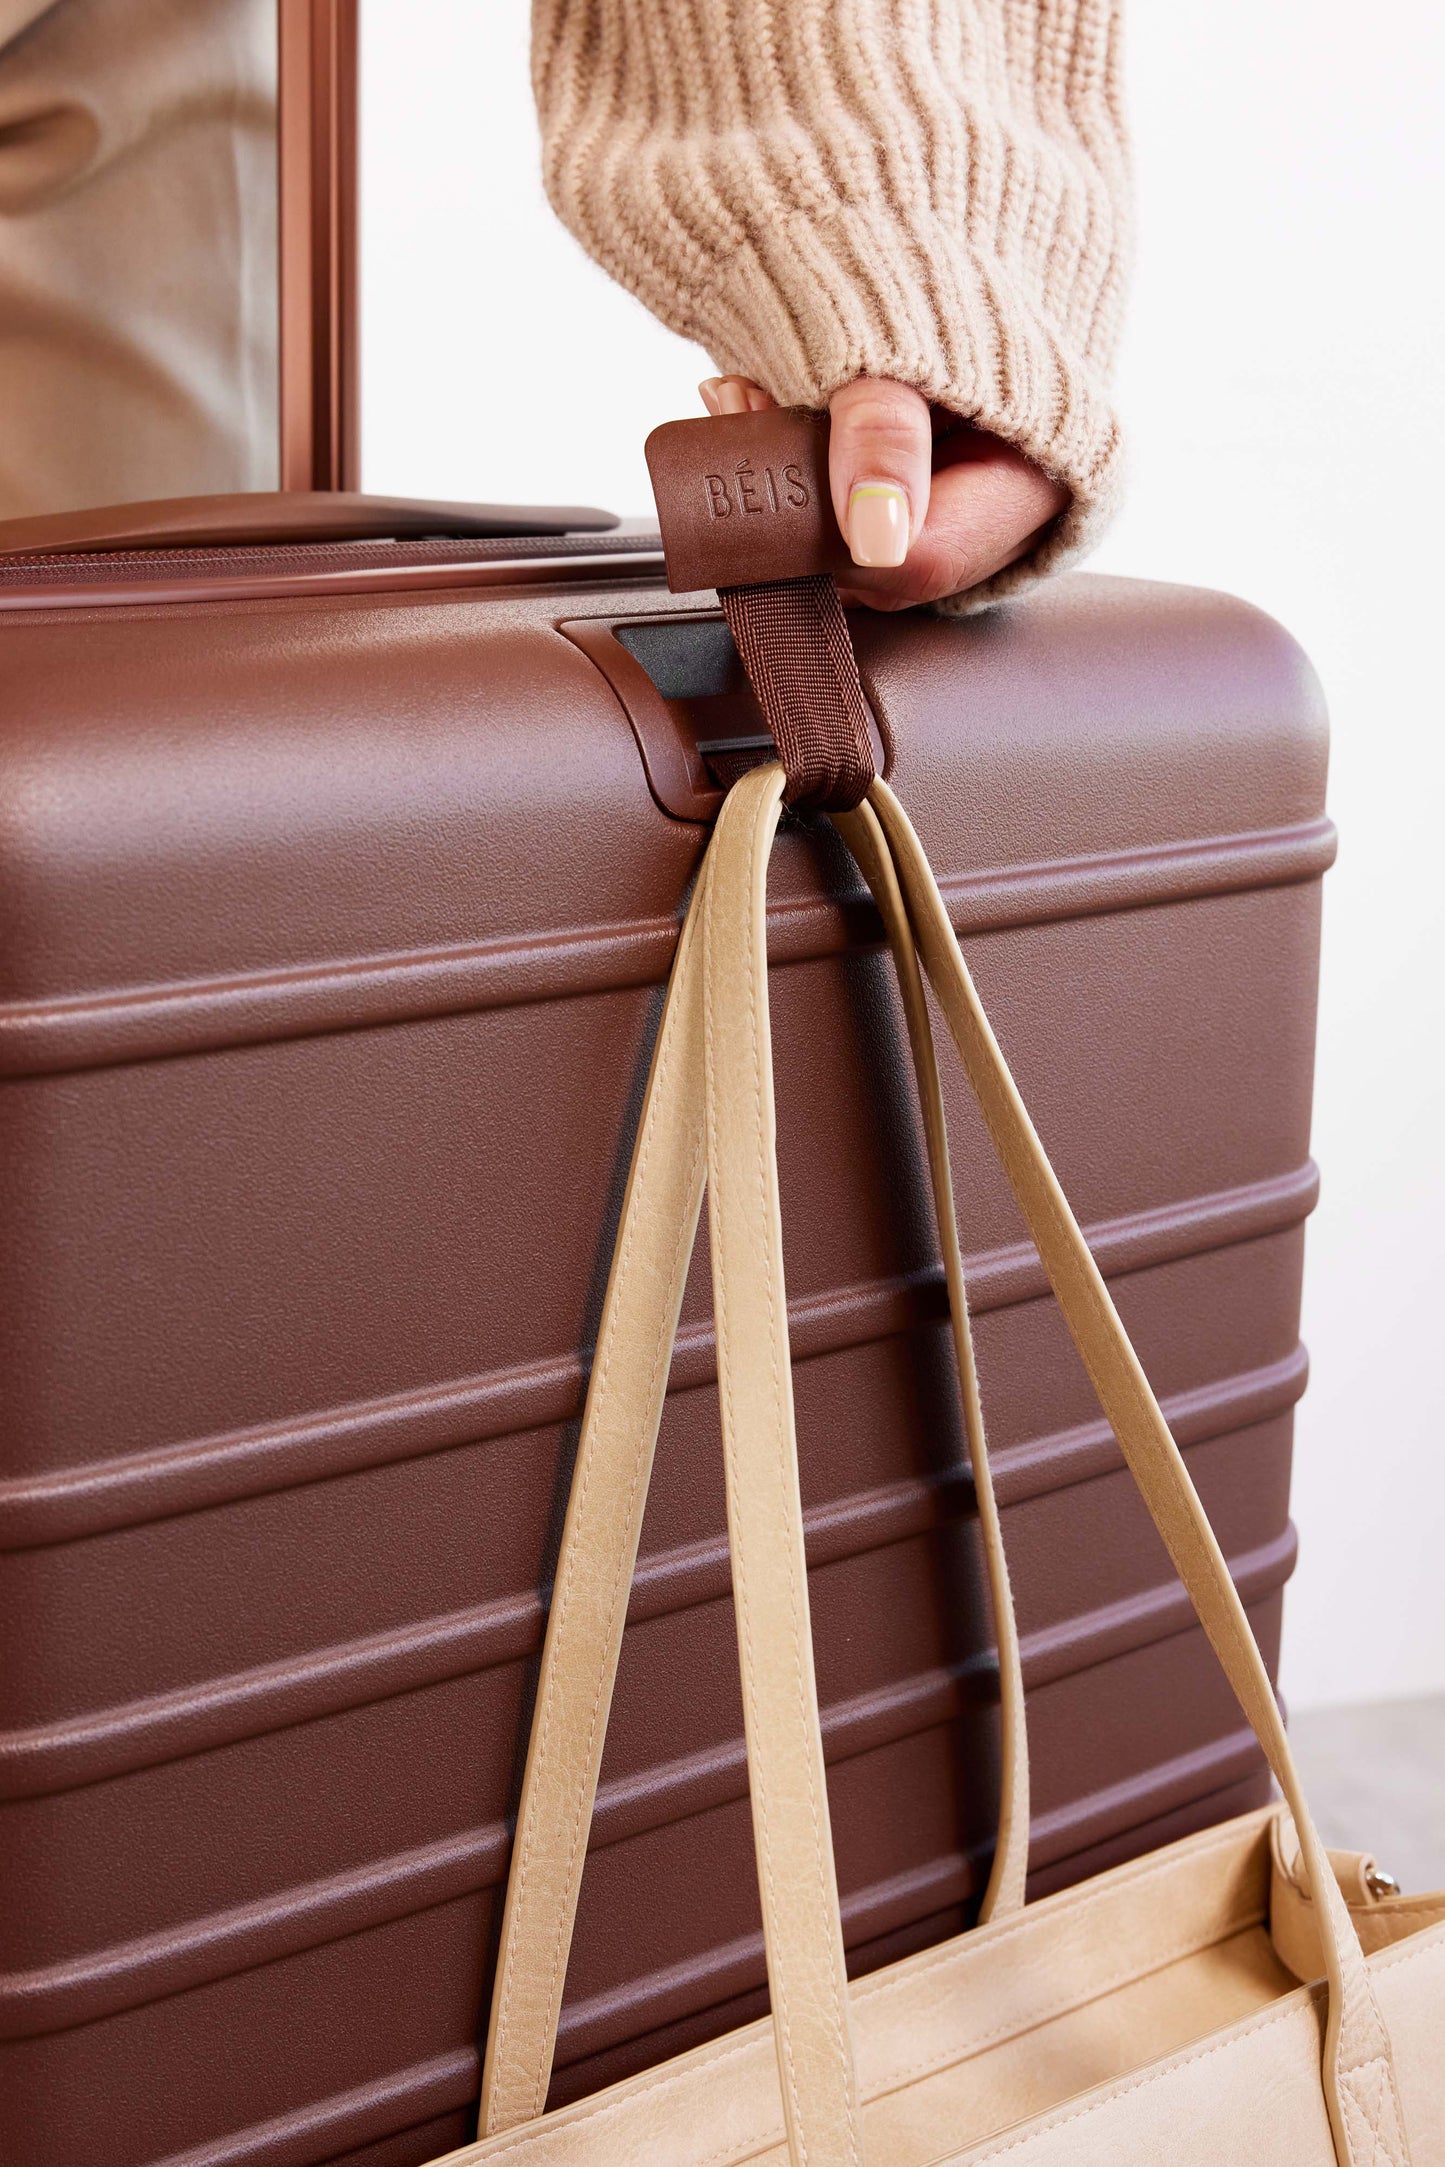 The Carry-On Roller in Maple